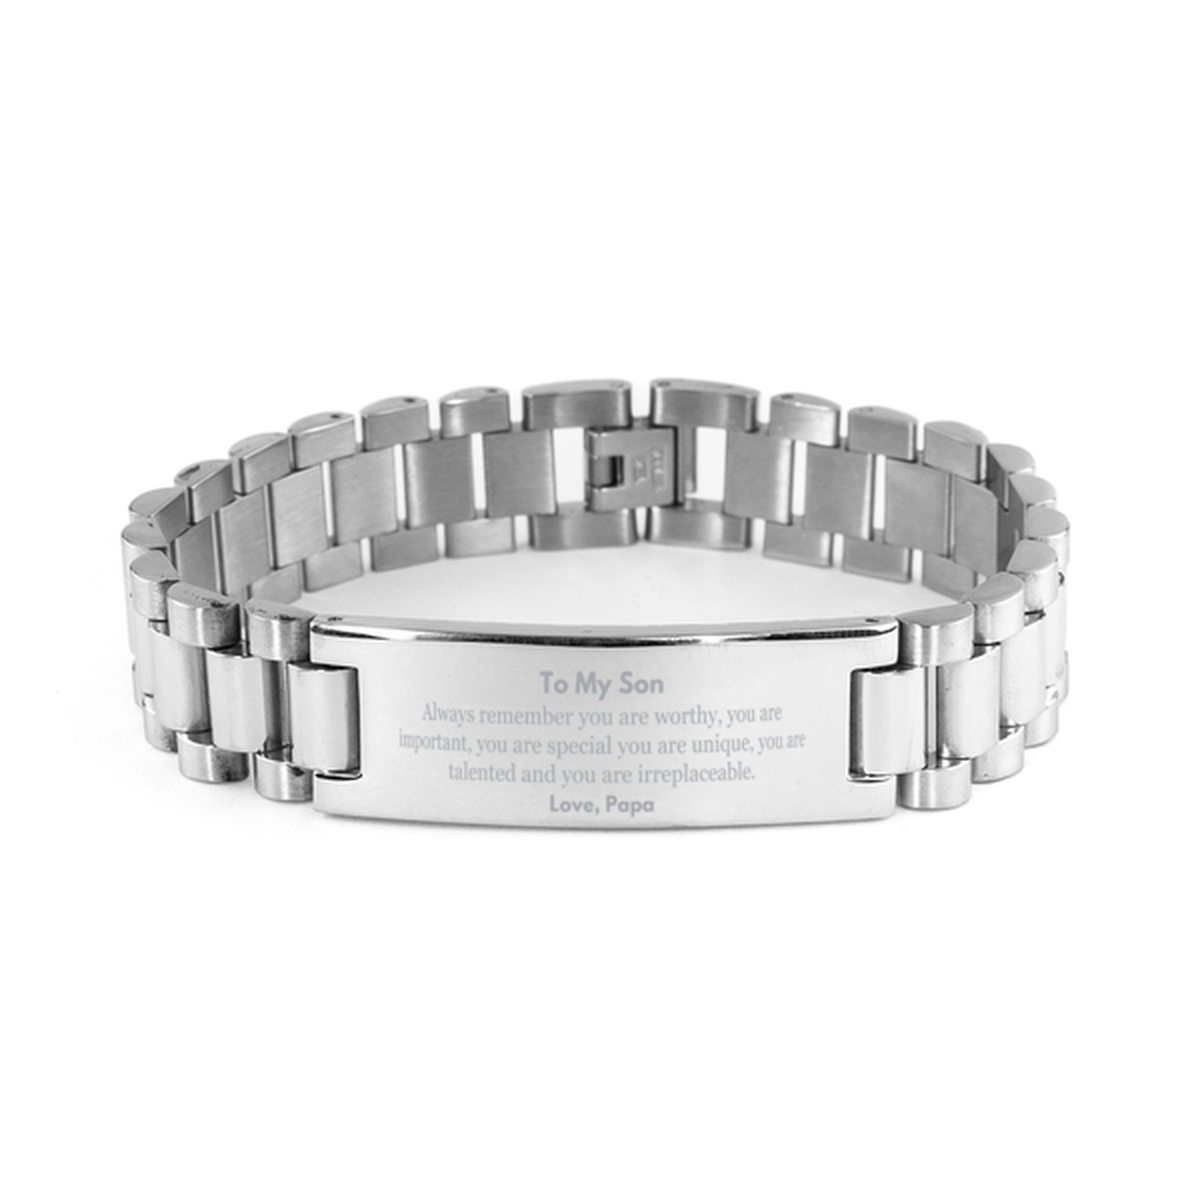 Son Birthday Gifts from Papa, Inspirational Ladder Stainless Steel Bracelet for Son Christmas Graduation Gifts for Son Always remember you are worthy, you are important. Love, Papa